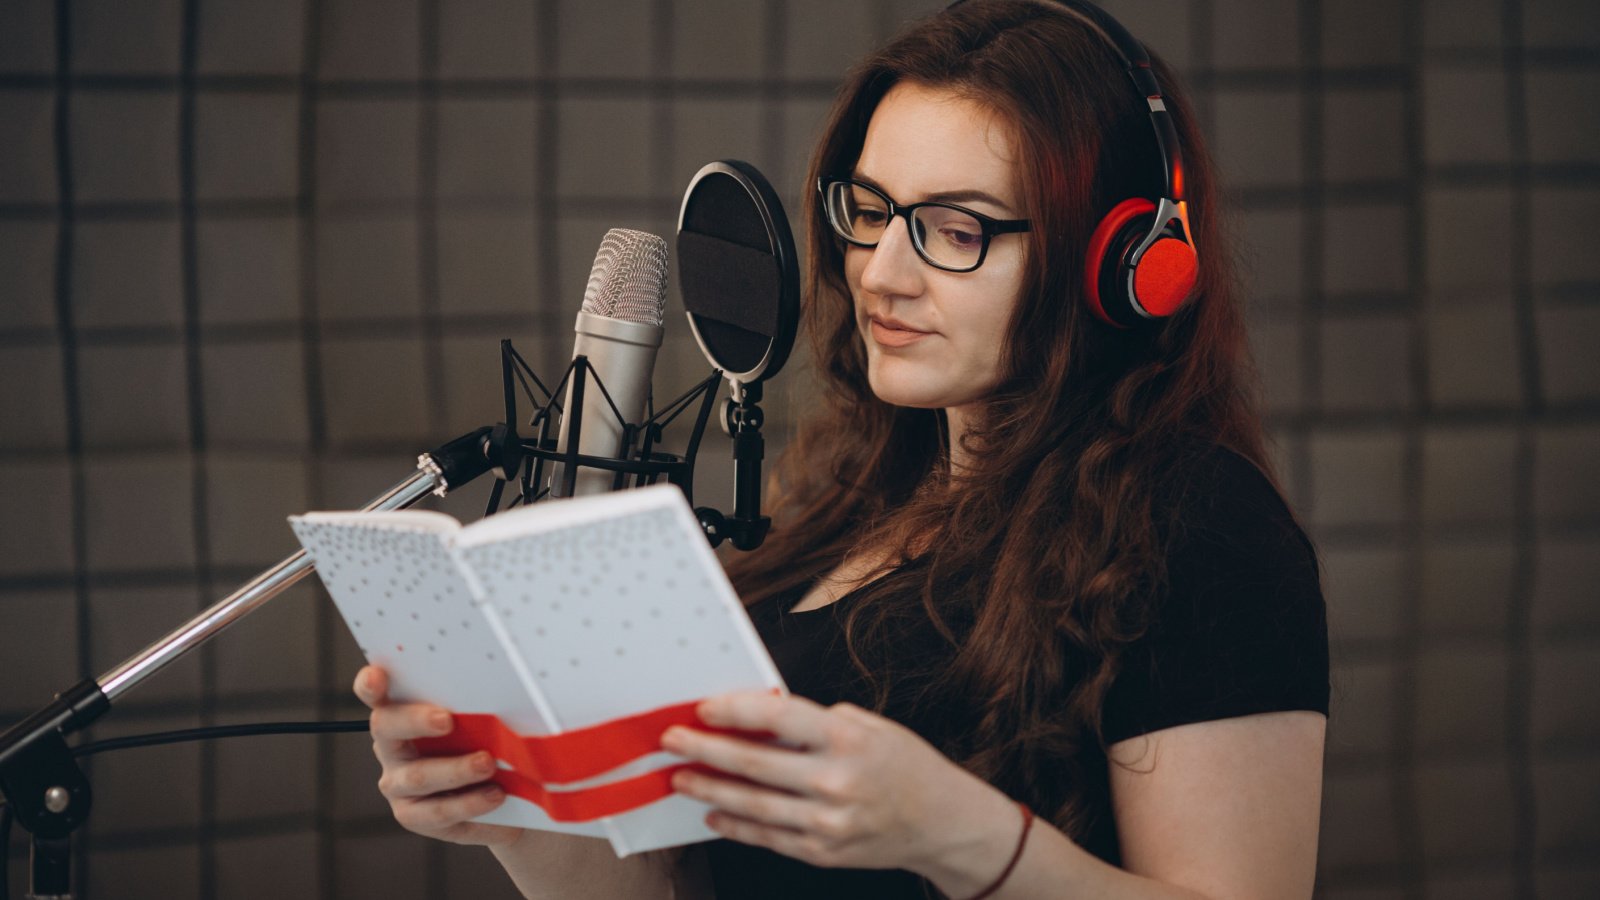 <p><a href="https://voice123.com" rel="noreferrer noopener">Voice123</a> is one of the largest marketplaces for professional voice actors. Independent authors, as well as some of the most recognizable companies in the world, have used Voice123 to find voice talent, such as The New York Times, Coca-Cola, and Airbnb. You can find projects in narration, commercial voice-overs, cartoons, video games, and more.</p><p>Voice 123 offers several tiered membership options for vocal talent. Along with a free standard membership, they offer several paid membership options that range in price from $49 a year up to $4,950 annually. The main differences between the memberships are the number of audition invitations, the number of times you appear in search results, how competitive your jobs are, and the level of customer support you receive.</p>